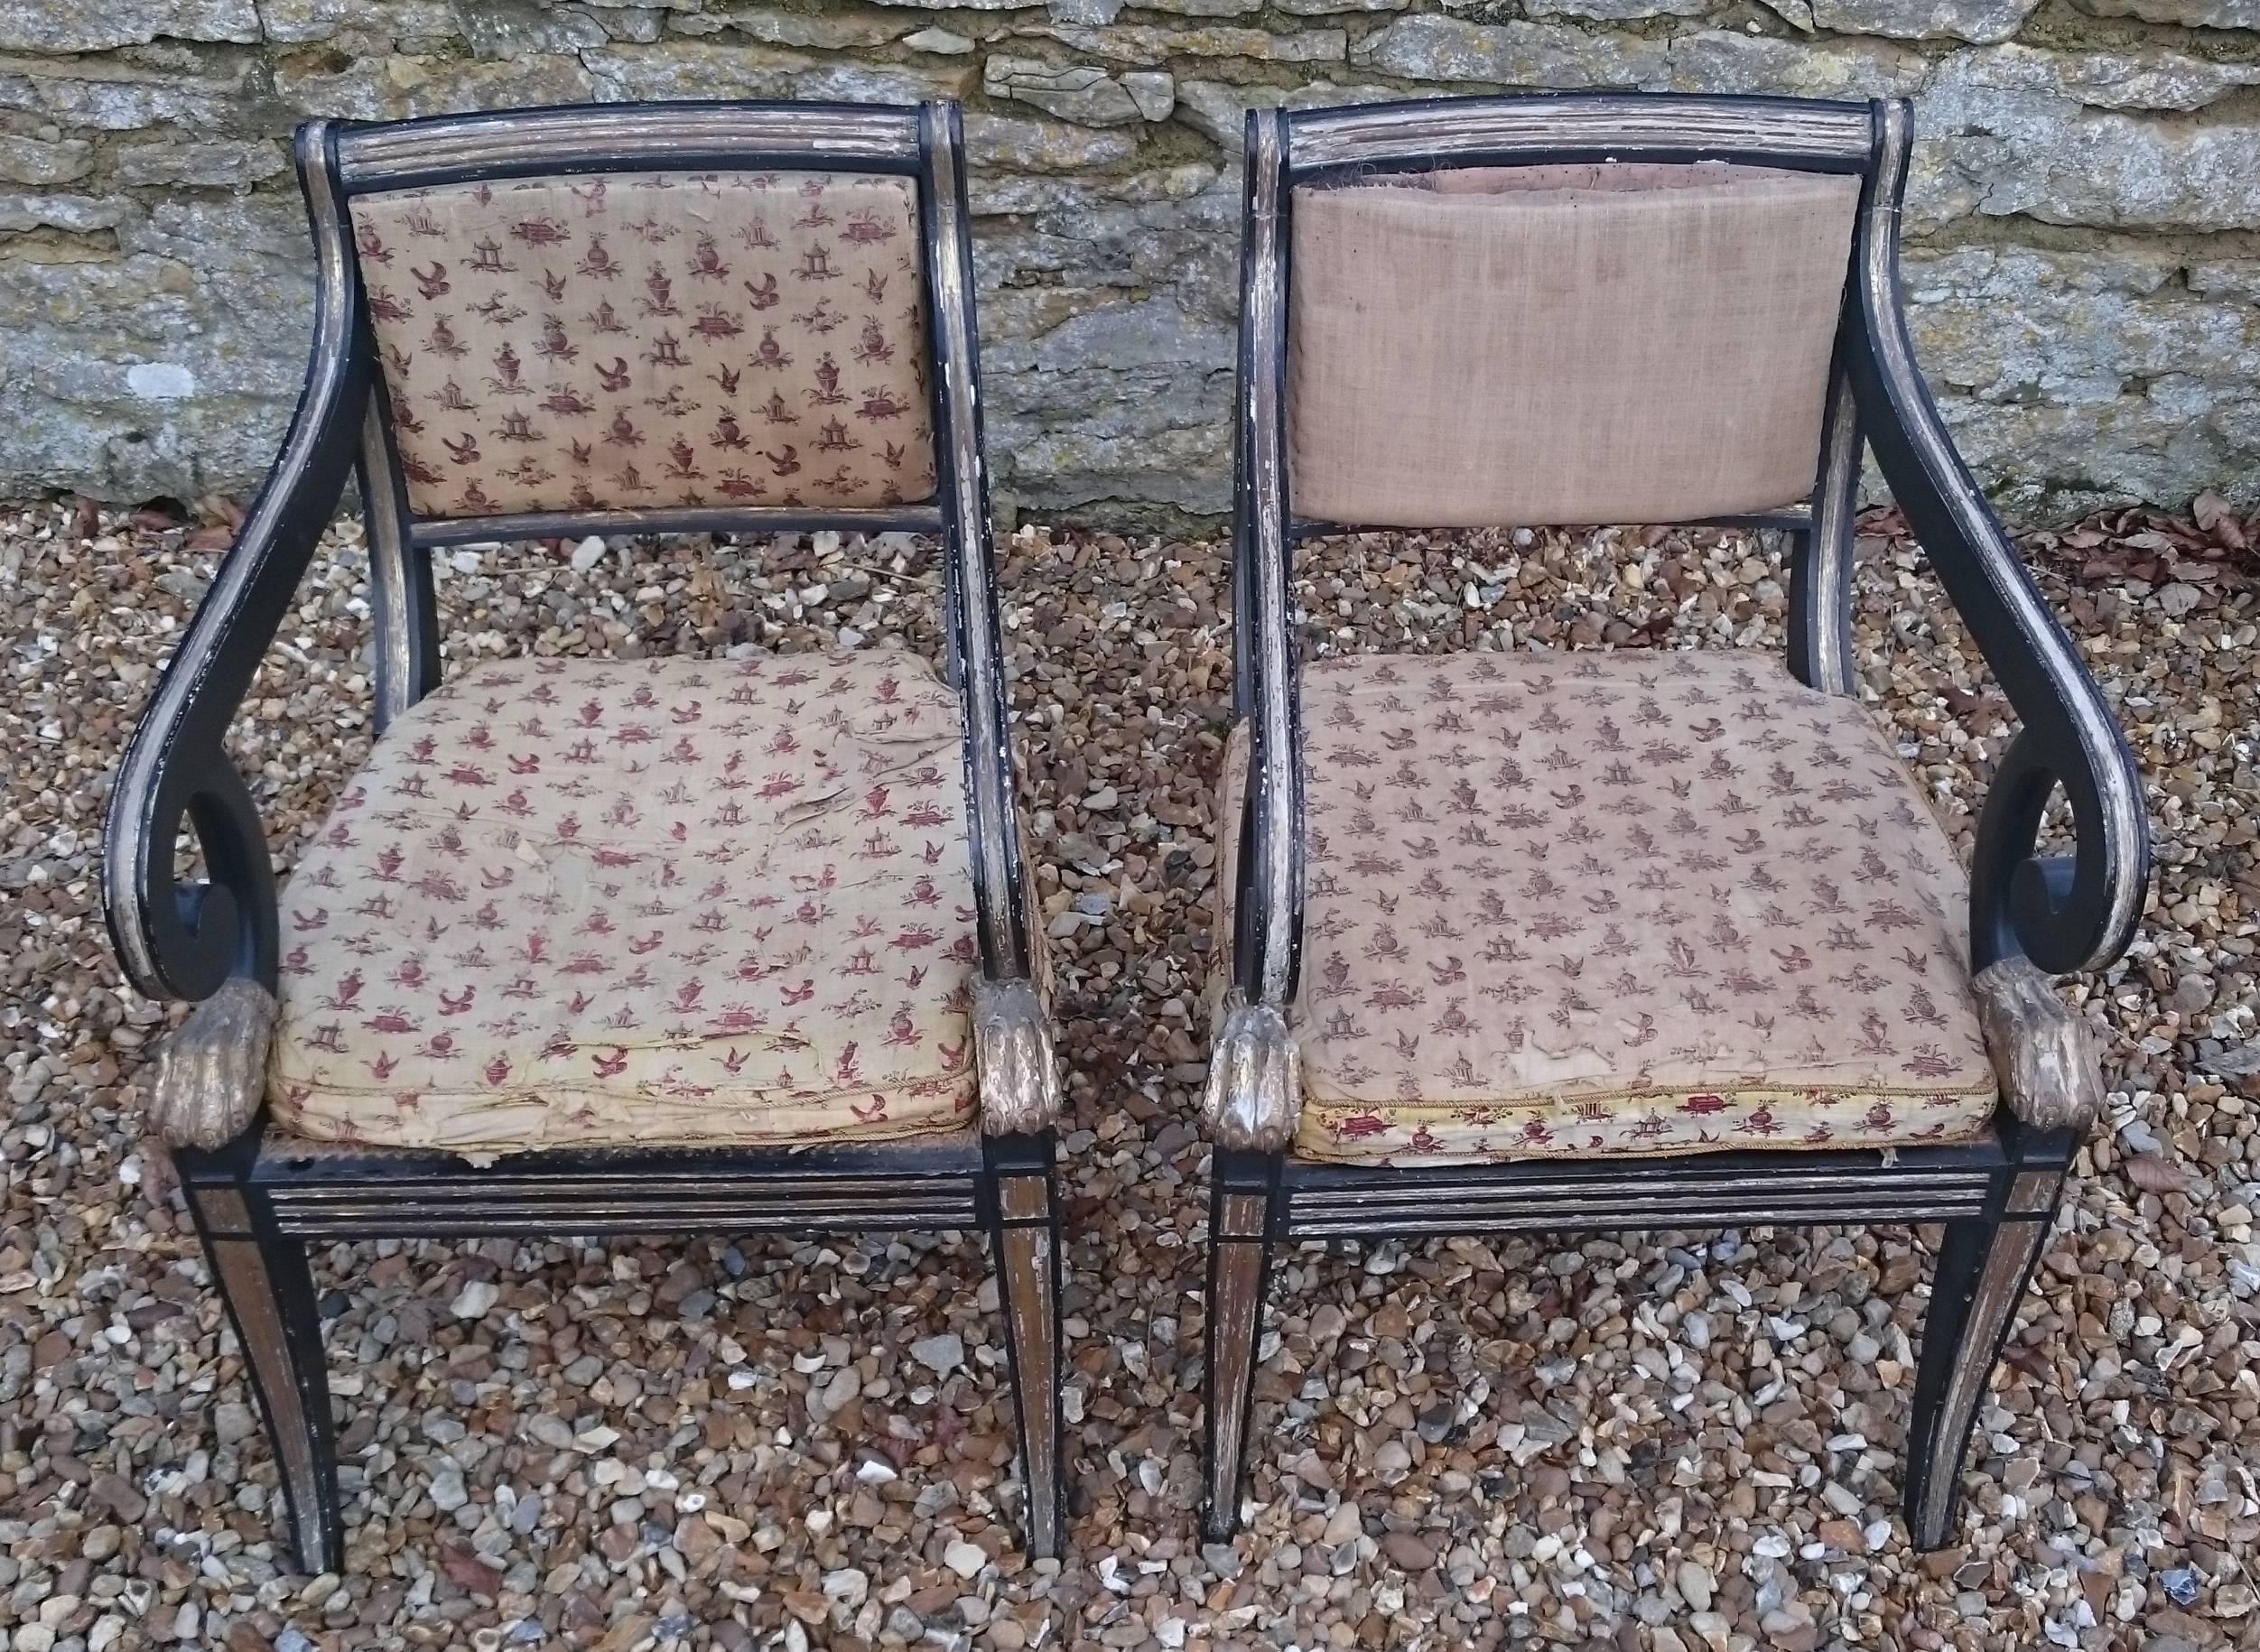 Pair of Regency Ebonised and Gilt Antique Salon Chairs.

Extremely Fine example of the sort of chair designed to be on display in a prominent room of a large and important house. These would have been in a large salon or drawing room, or a large